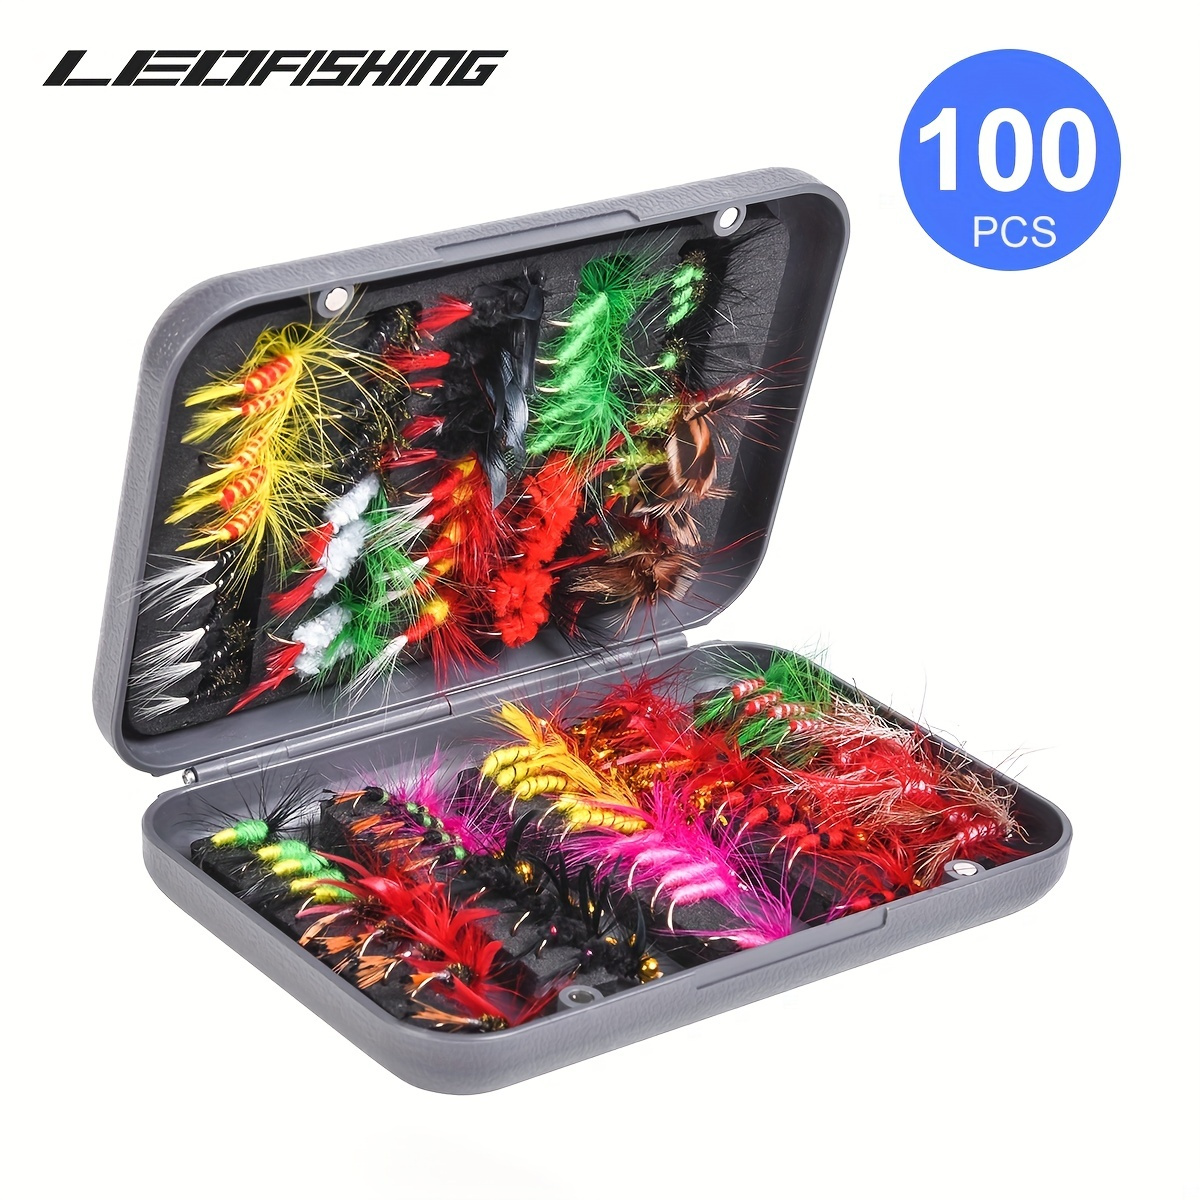 

100pcs Premium Handmade Fly Fishing Lures Kit - Includes Dry/wet Flies, Streamers, And Assorted Flies For Trout And Bass Fishing - Comes With Durable Fly Box For Easy Storage And Organization